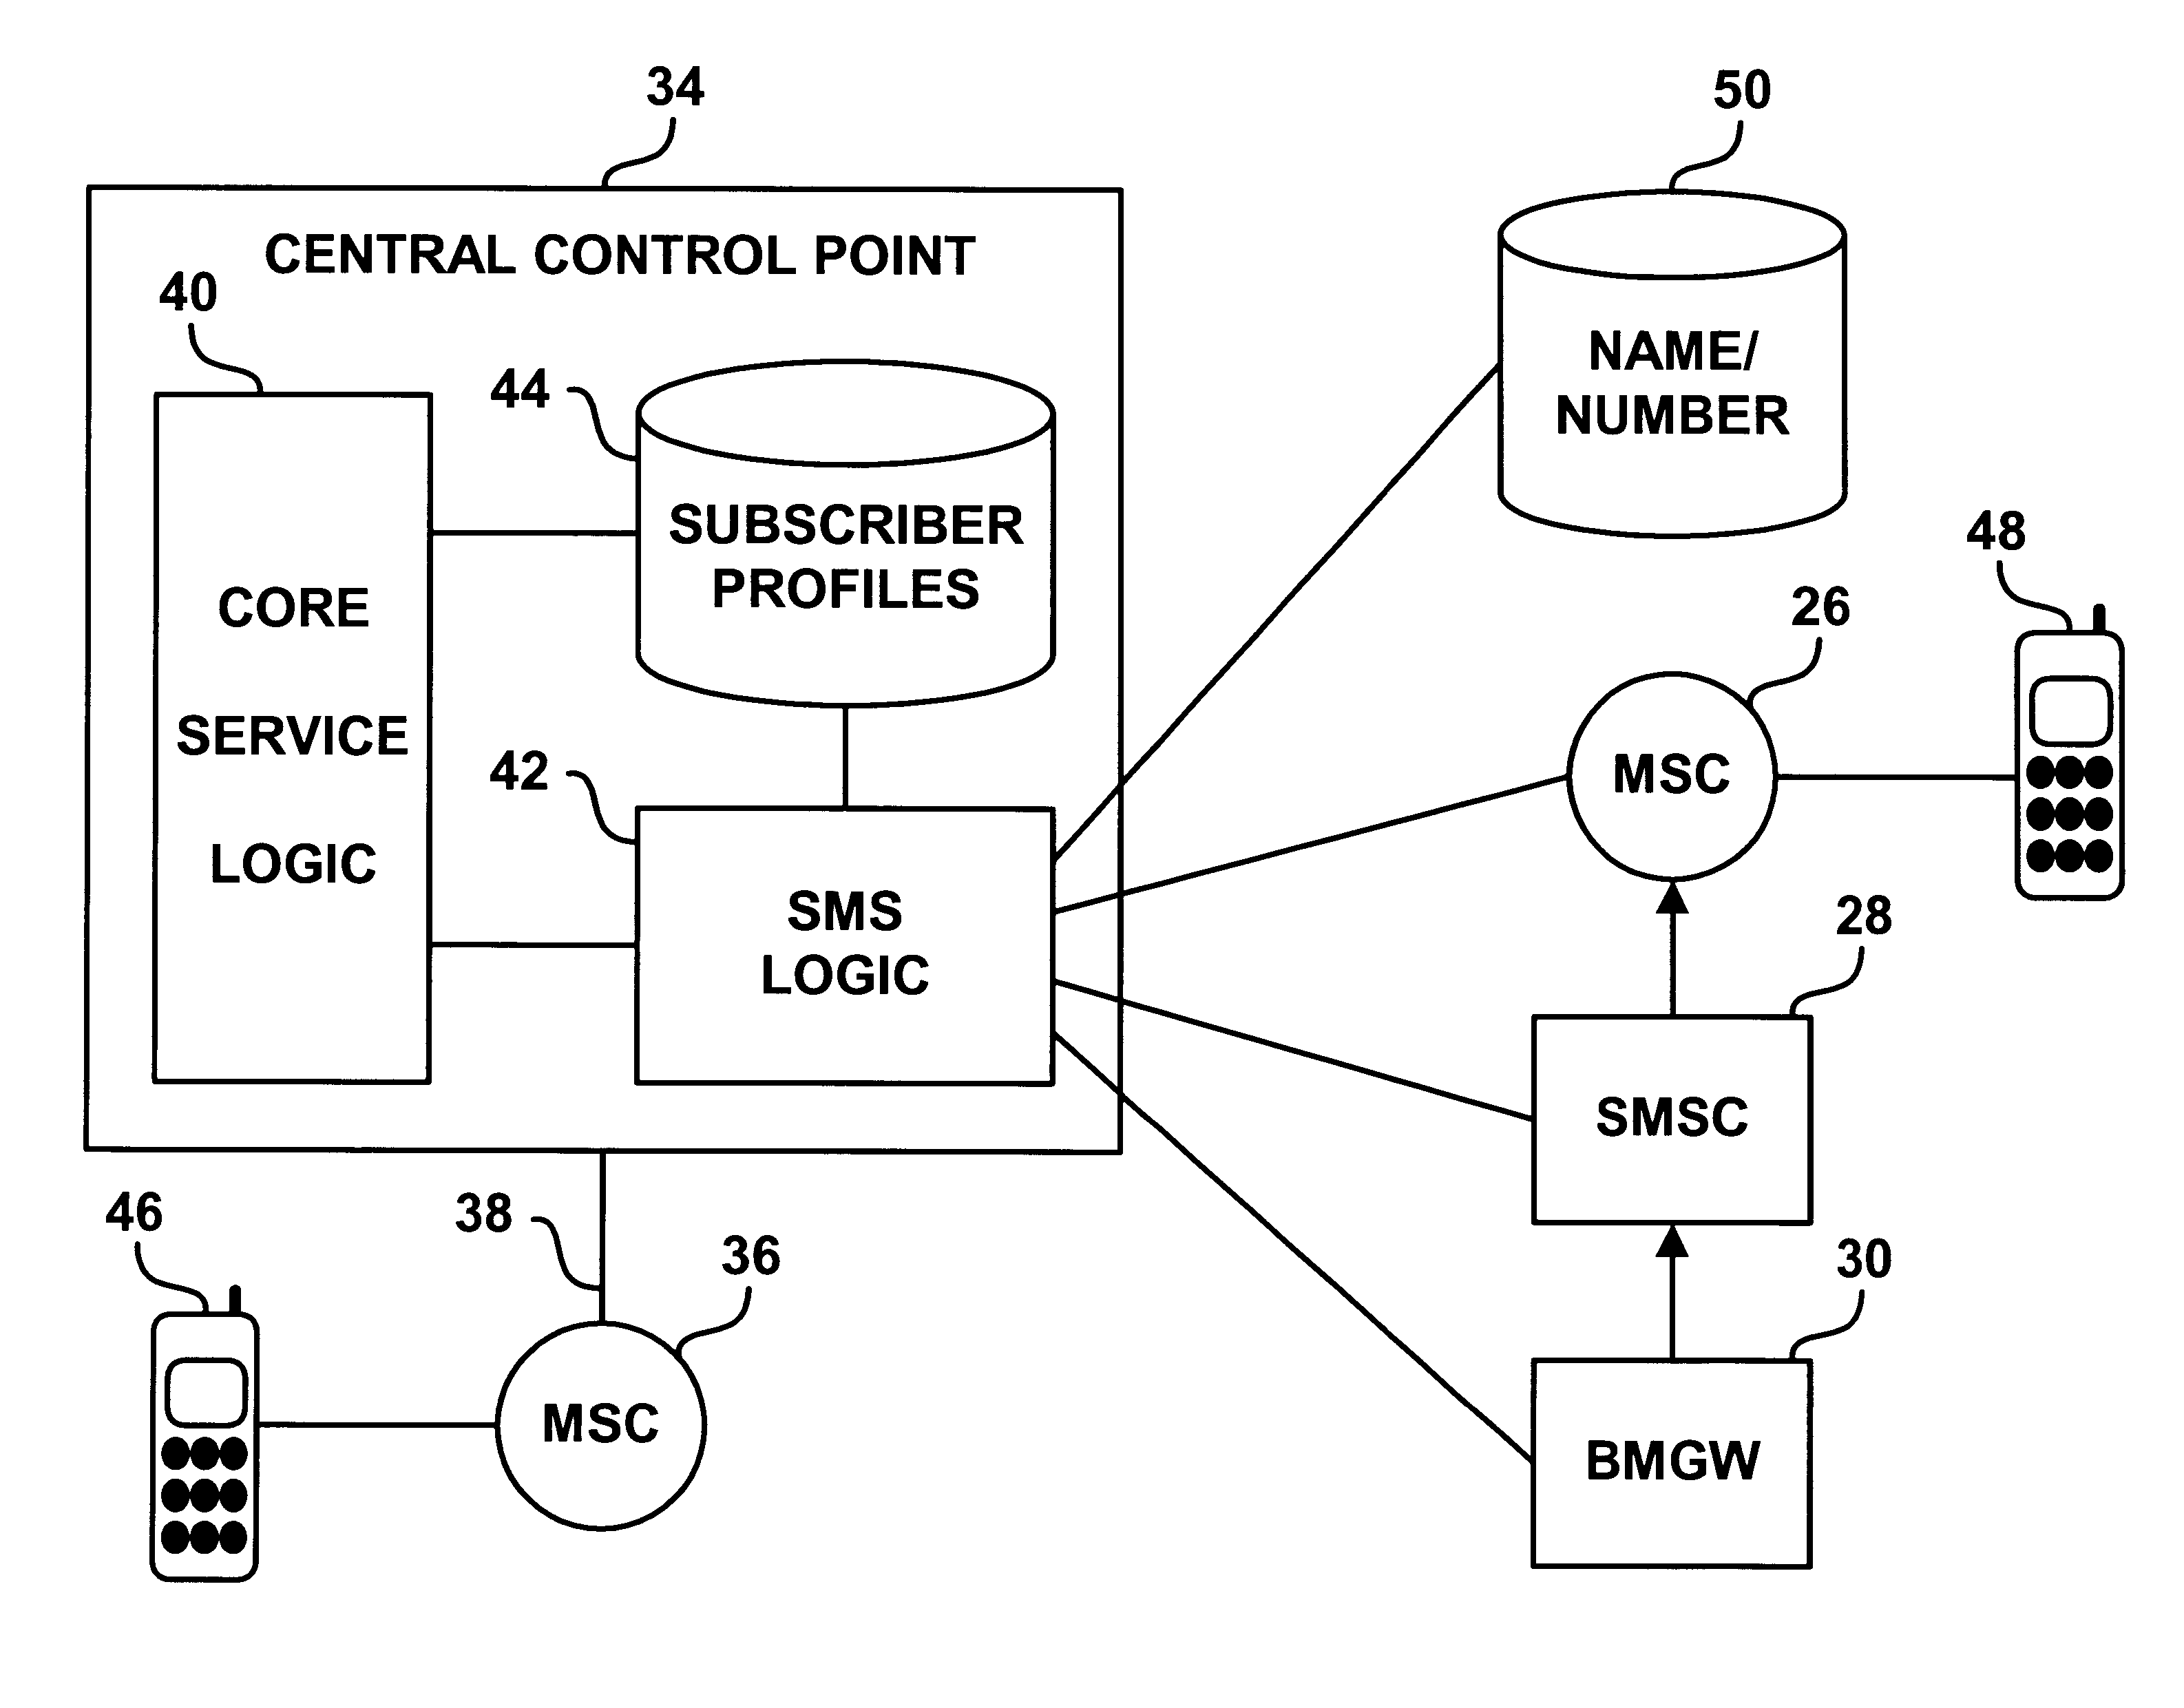 Automatic in-line messaging system